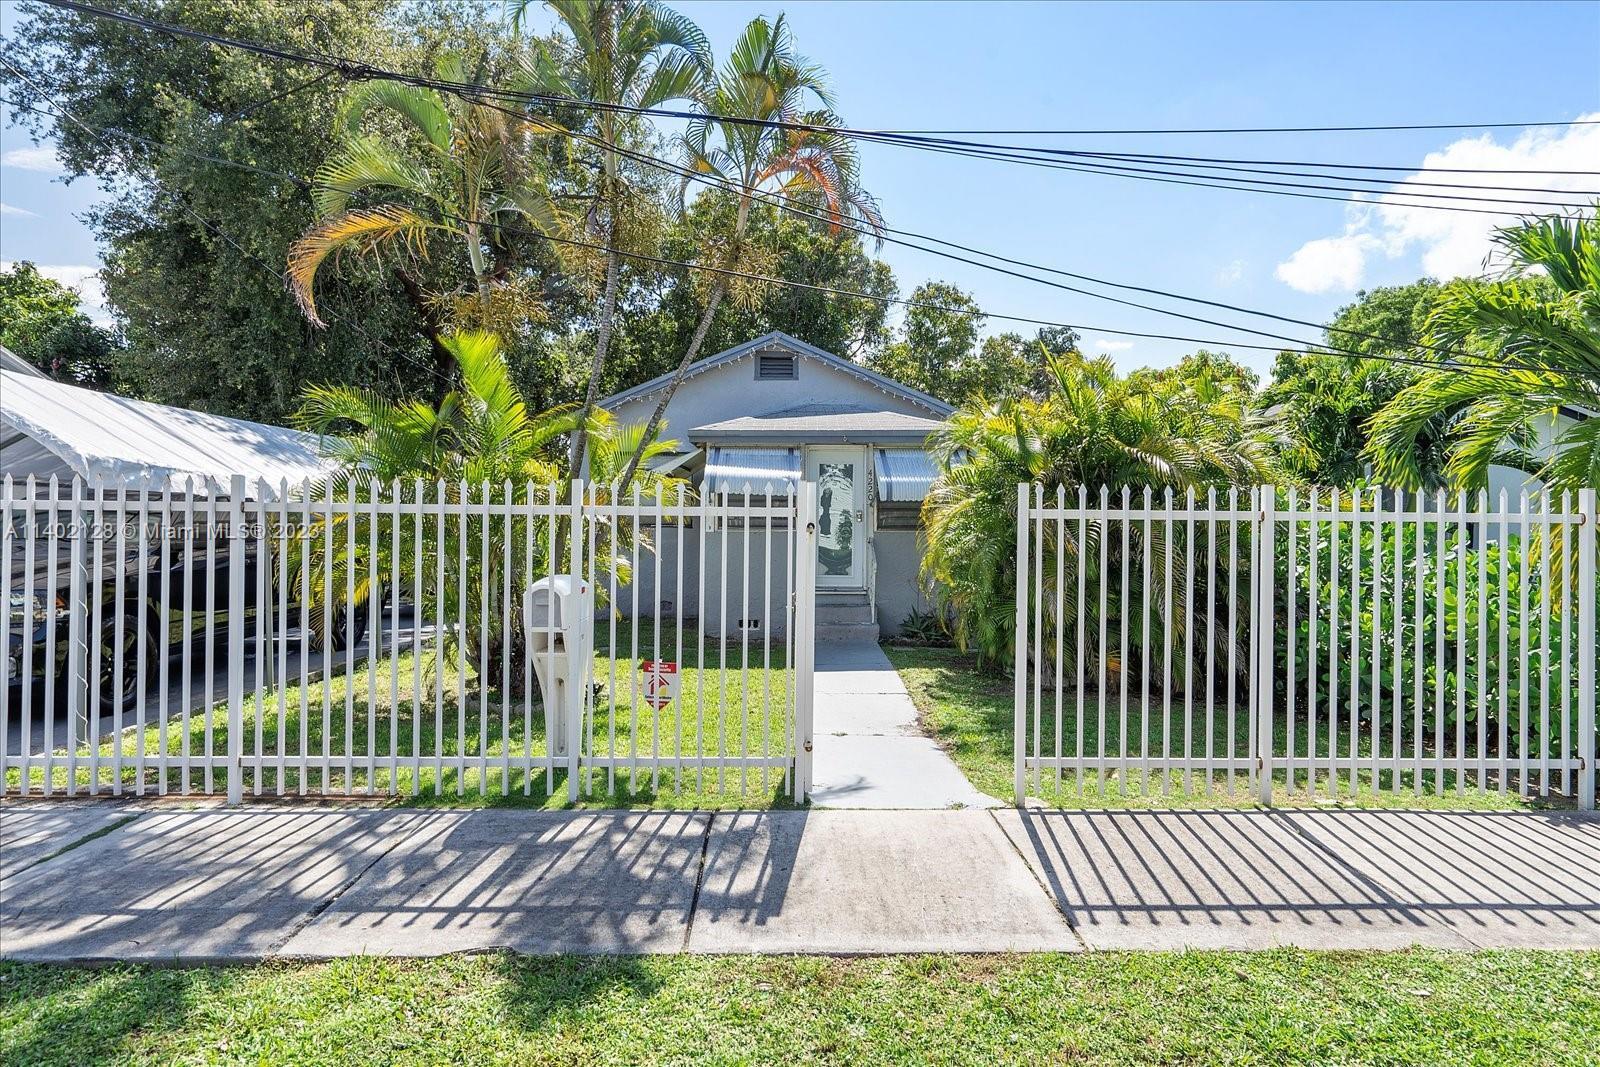 Photo of 4220 NW 3rd Ave in Miami, FL